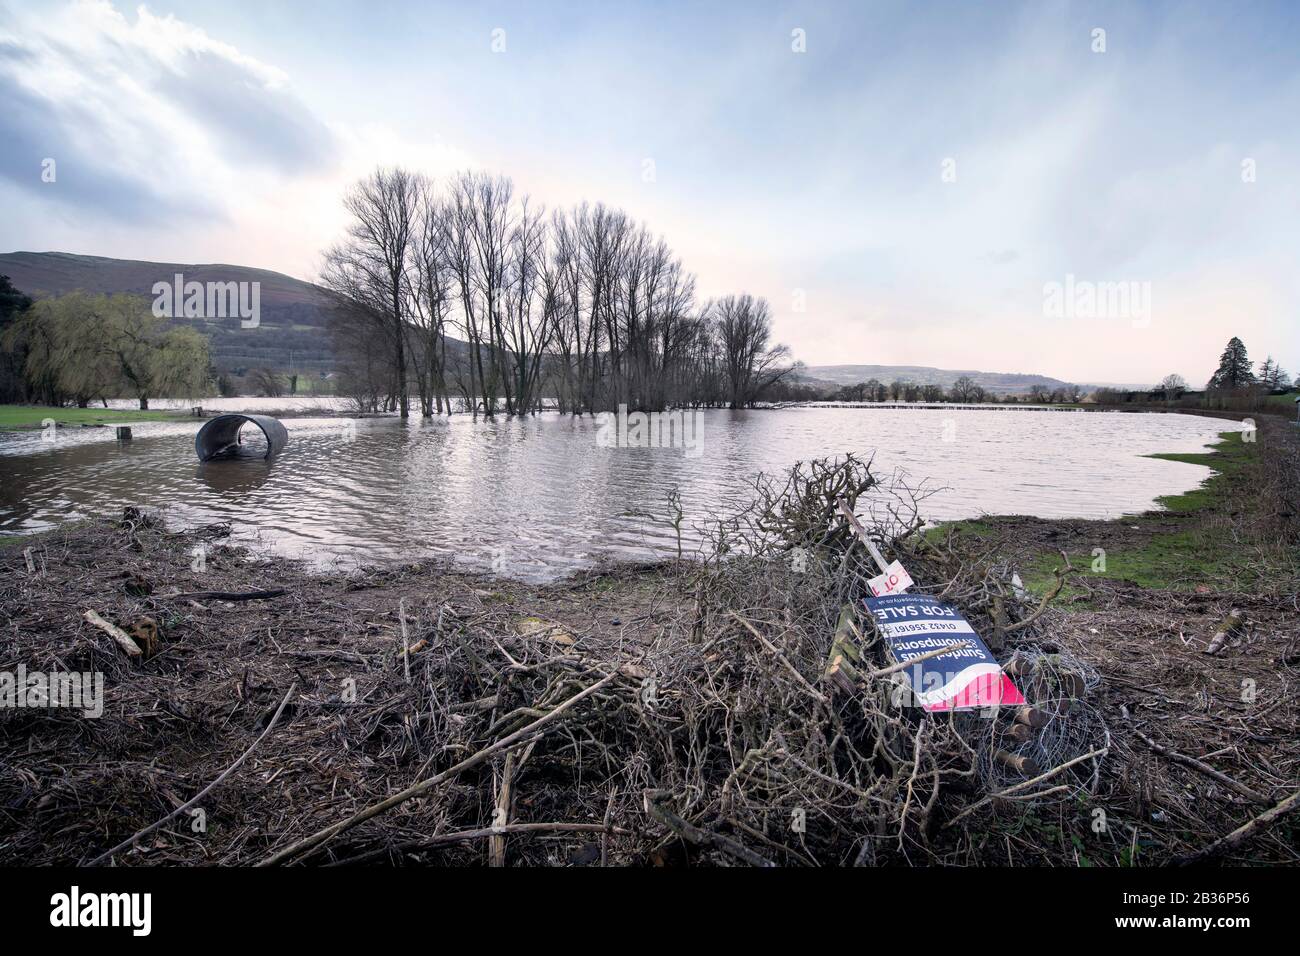 Floodwaters from the River Usk around Llanwenarth near Abergavenny, UK during flooding in Feb 2020 Stock Photo